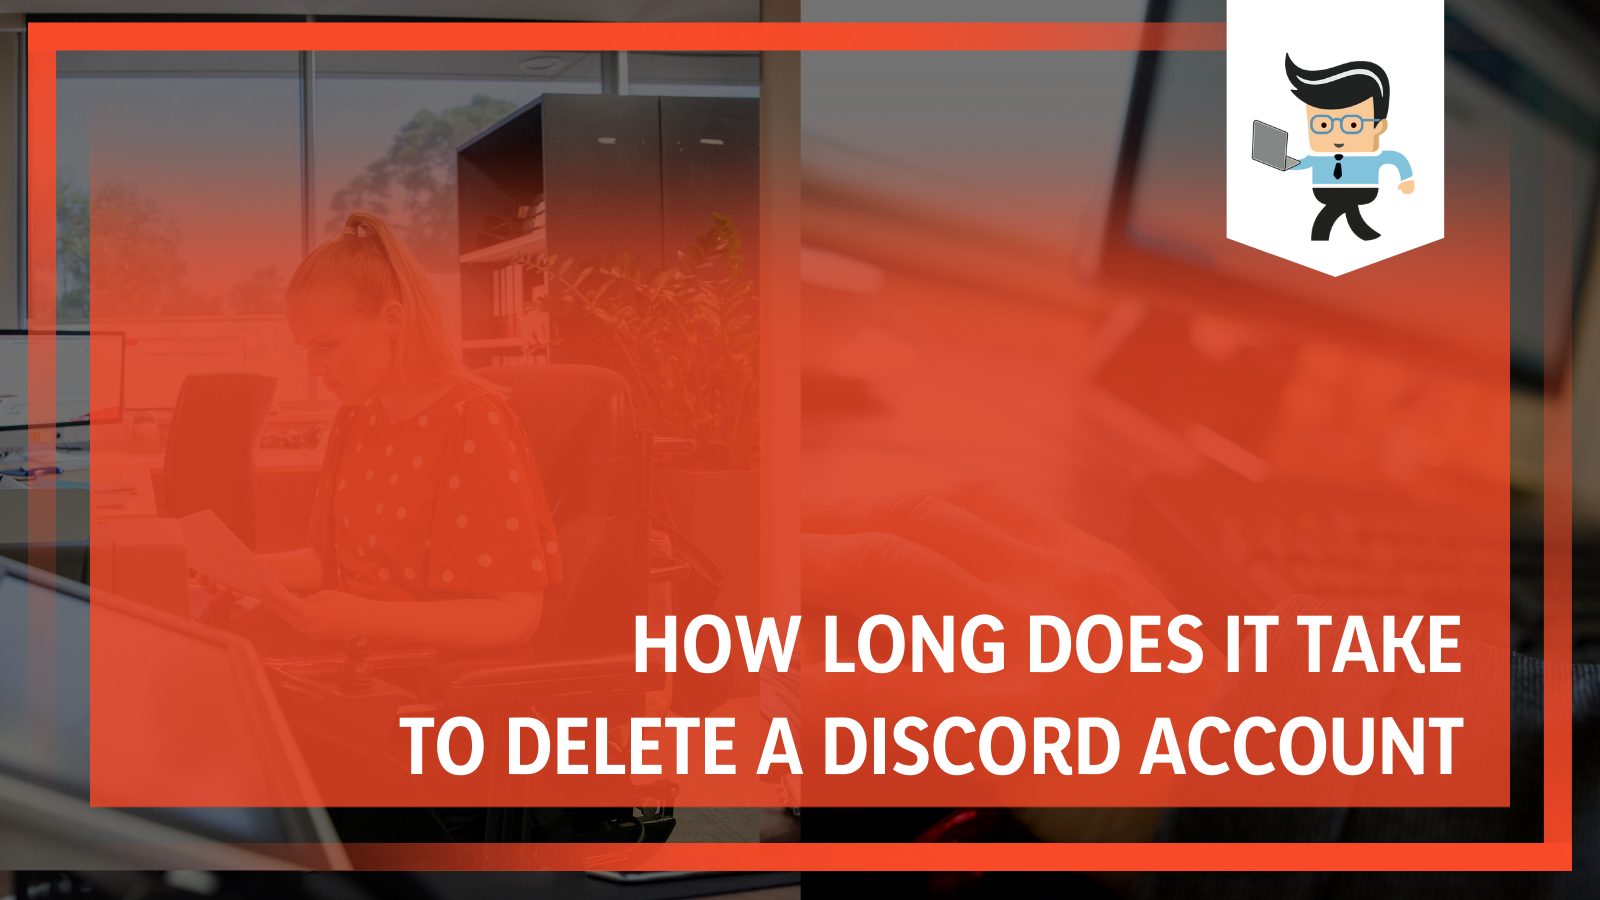 How to delete a discord account